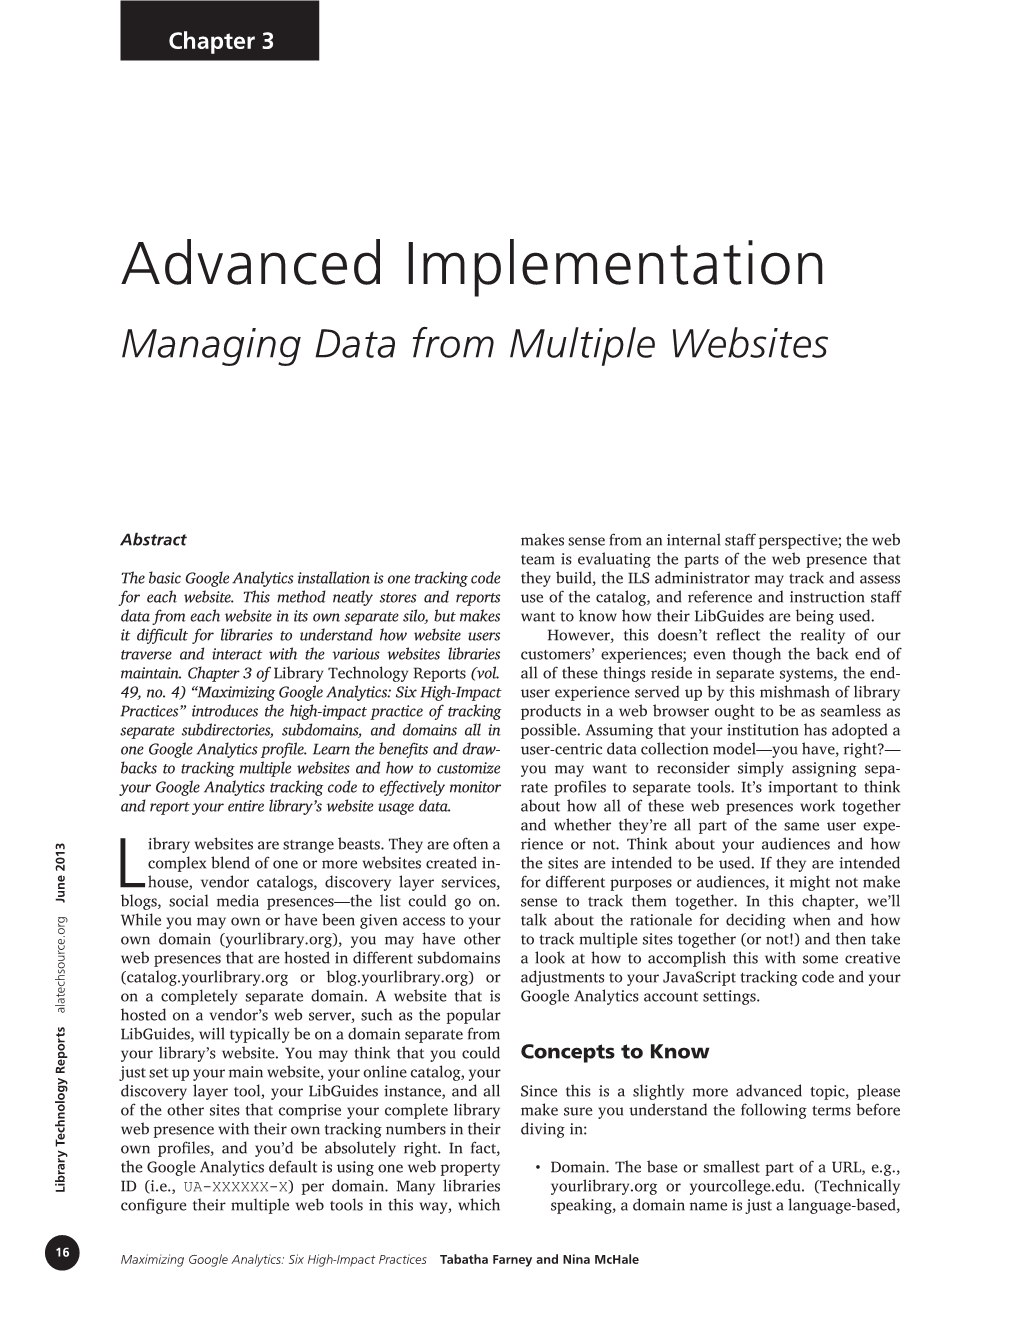 Advanced Implementation Managing Data from Multiple Websites